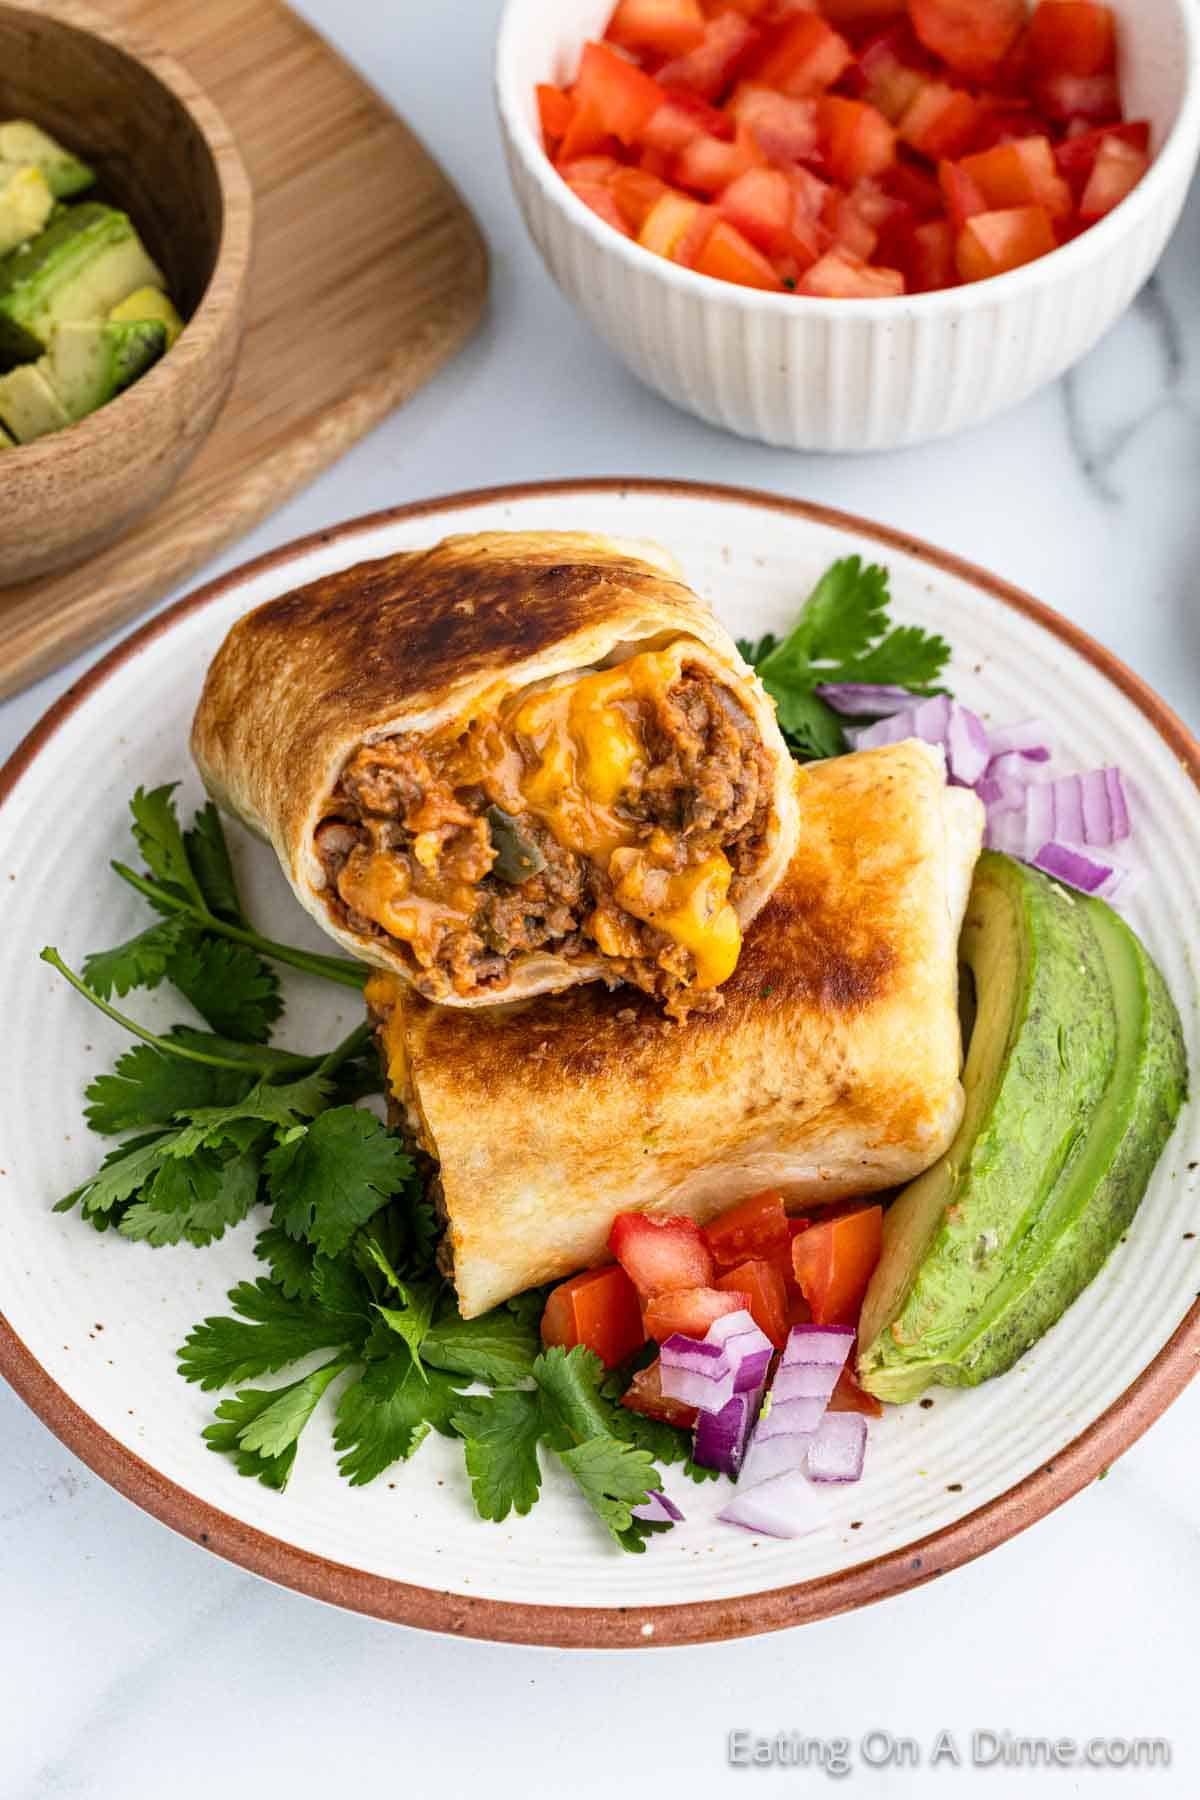 A beef chimichanga cut in half, revealing its filling of meat, cheese, and vegetables, is placed on a white plate with fresh cilantro, sliced avocado, diced tomatoes, and chopped red onions. Bowls with additional diced tomatoes and avocado pieces are in the background.